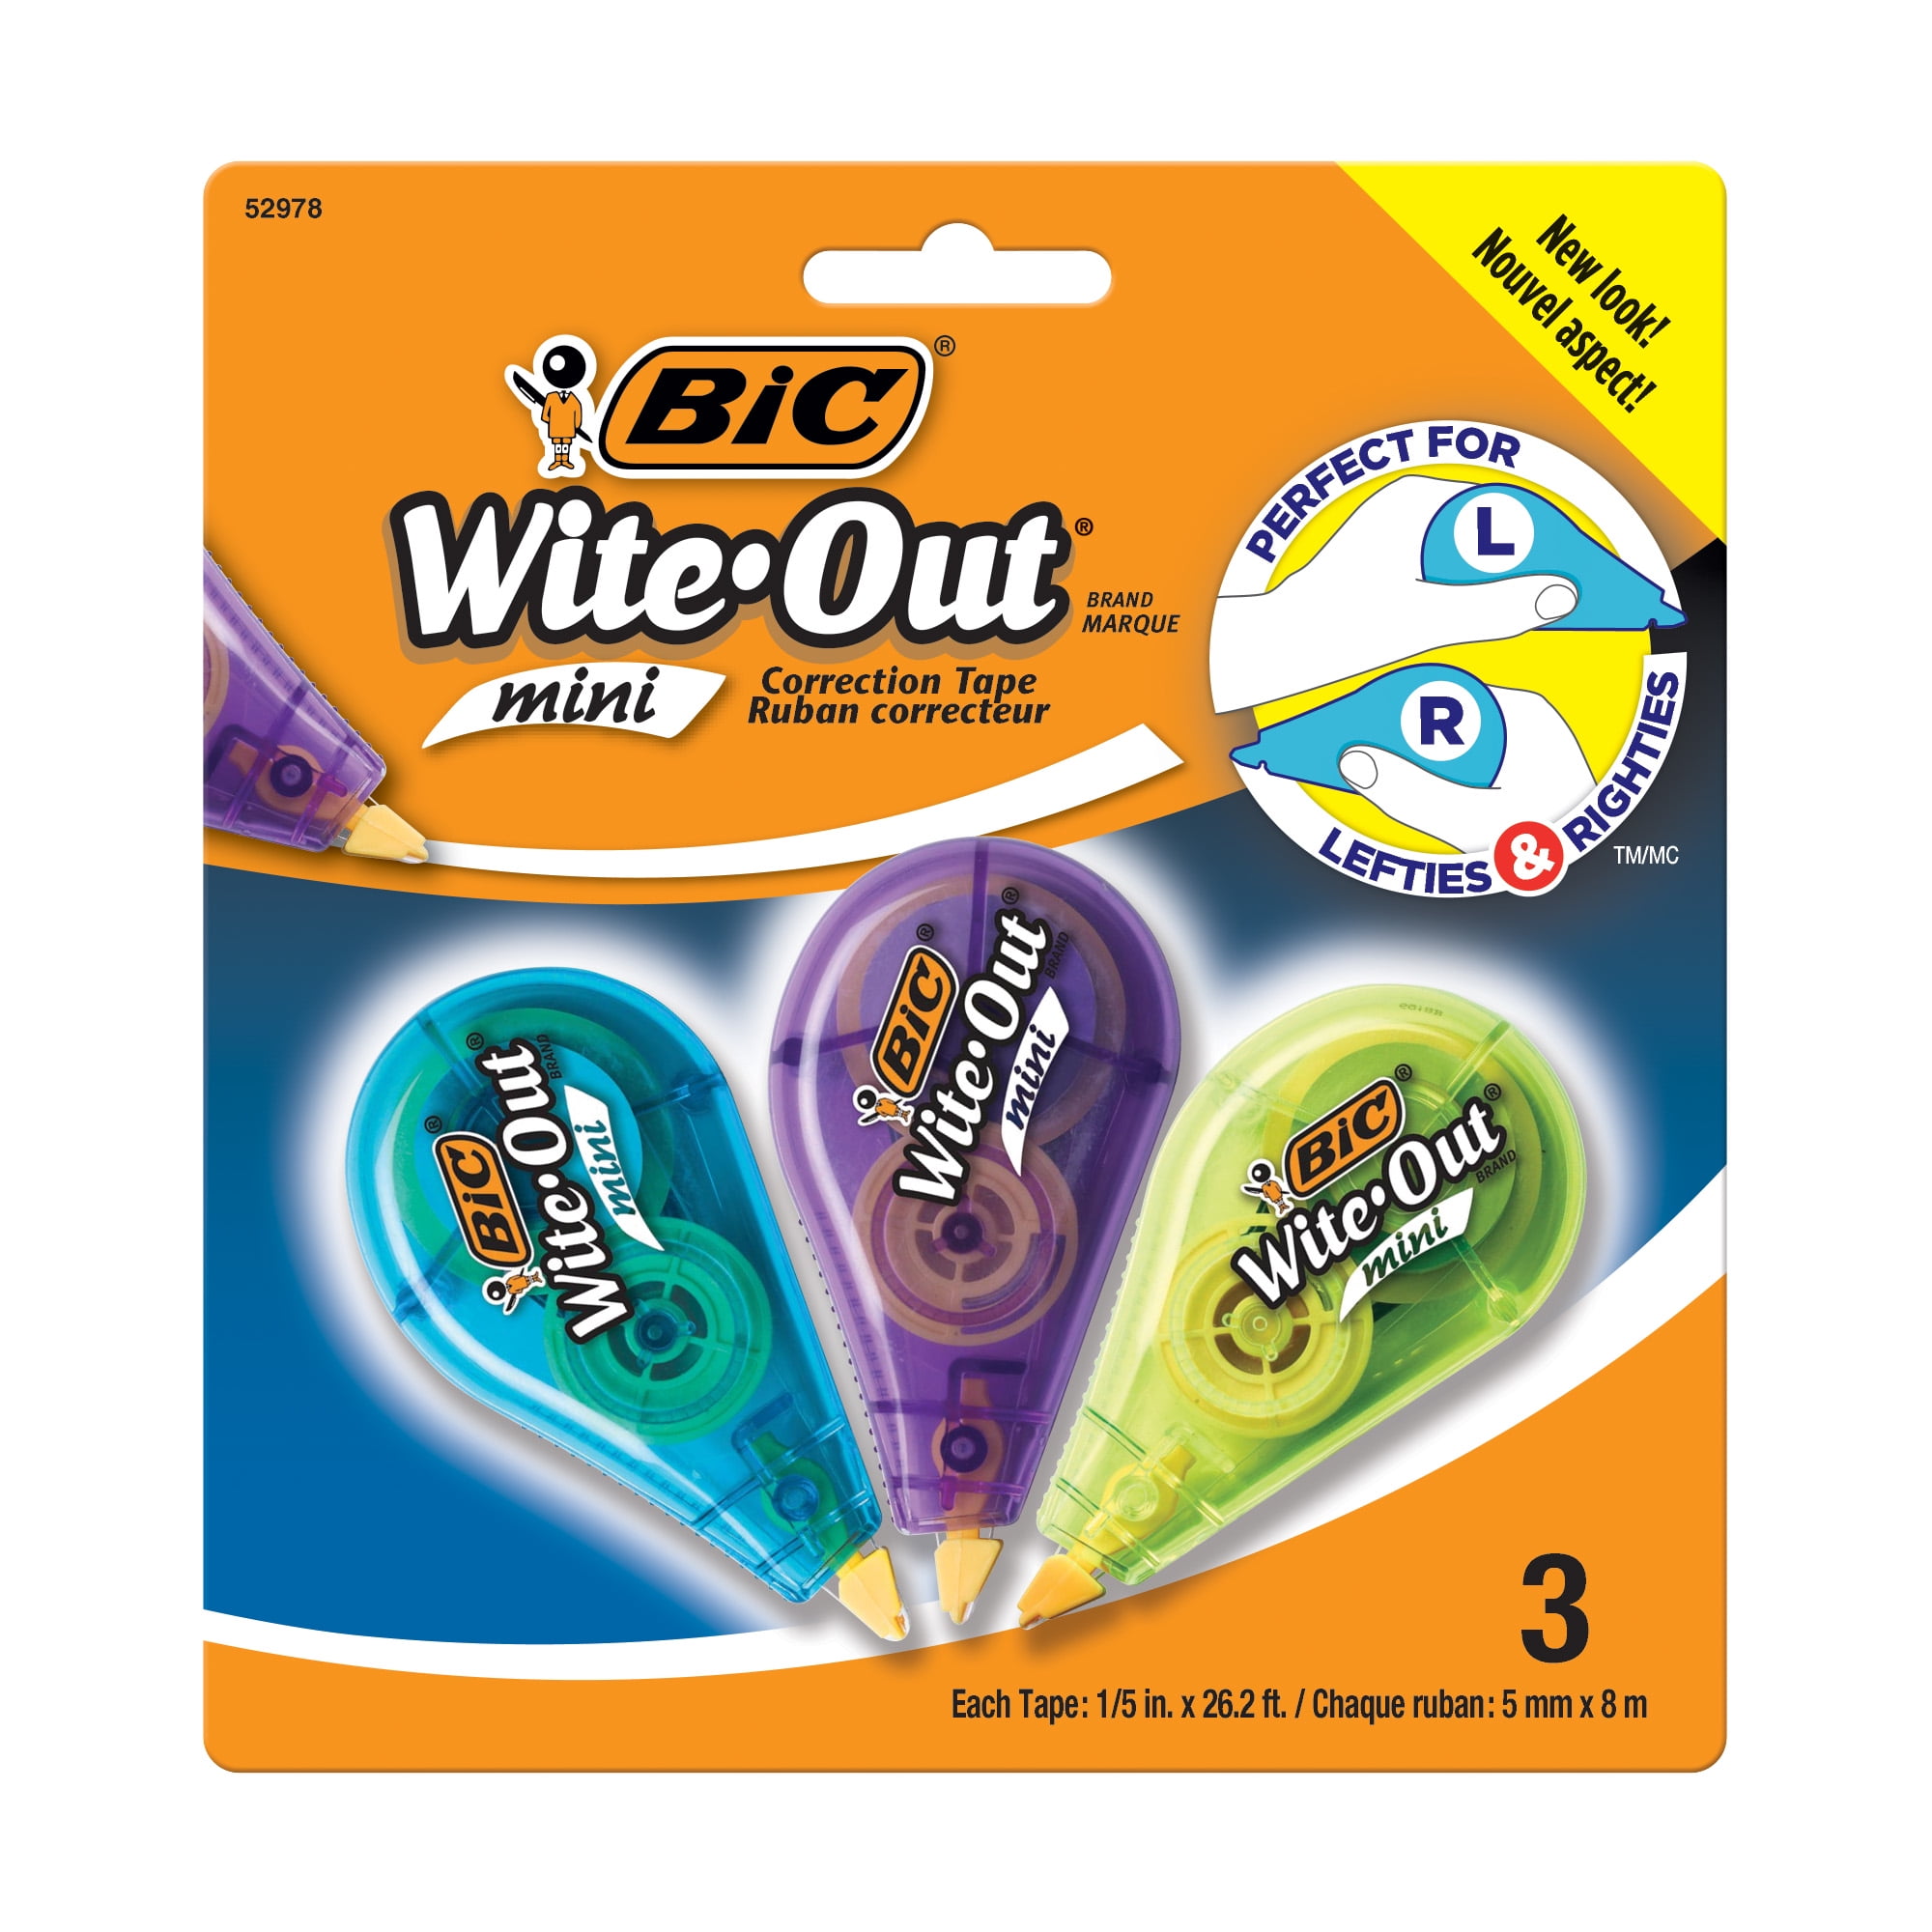 BIC Wite-Out Brand Mini Correction Tape, White, 3 Count